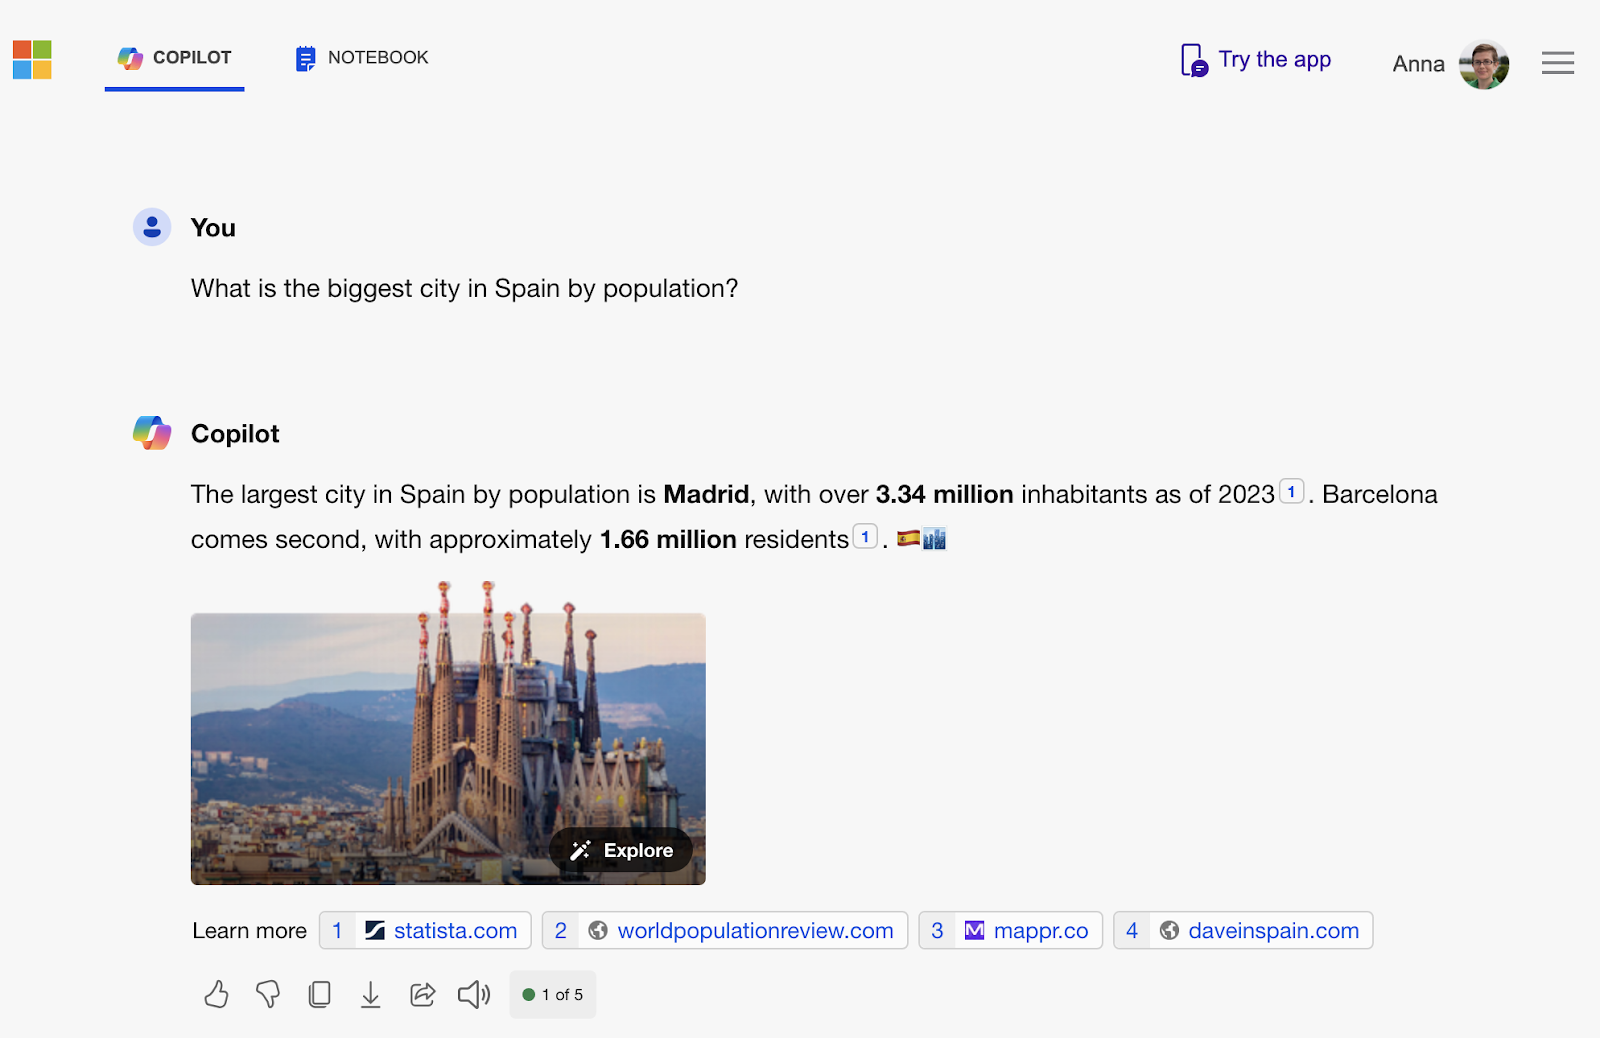 Microsoft Copilot response to the question 'What is the biggest city in Spain by population?'